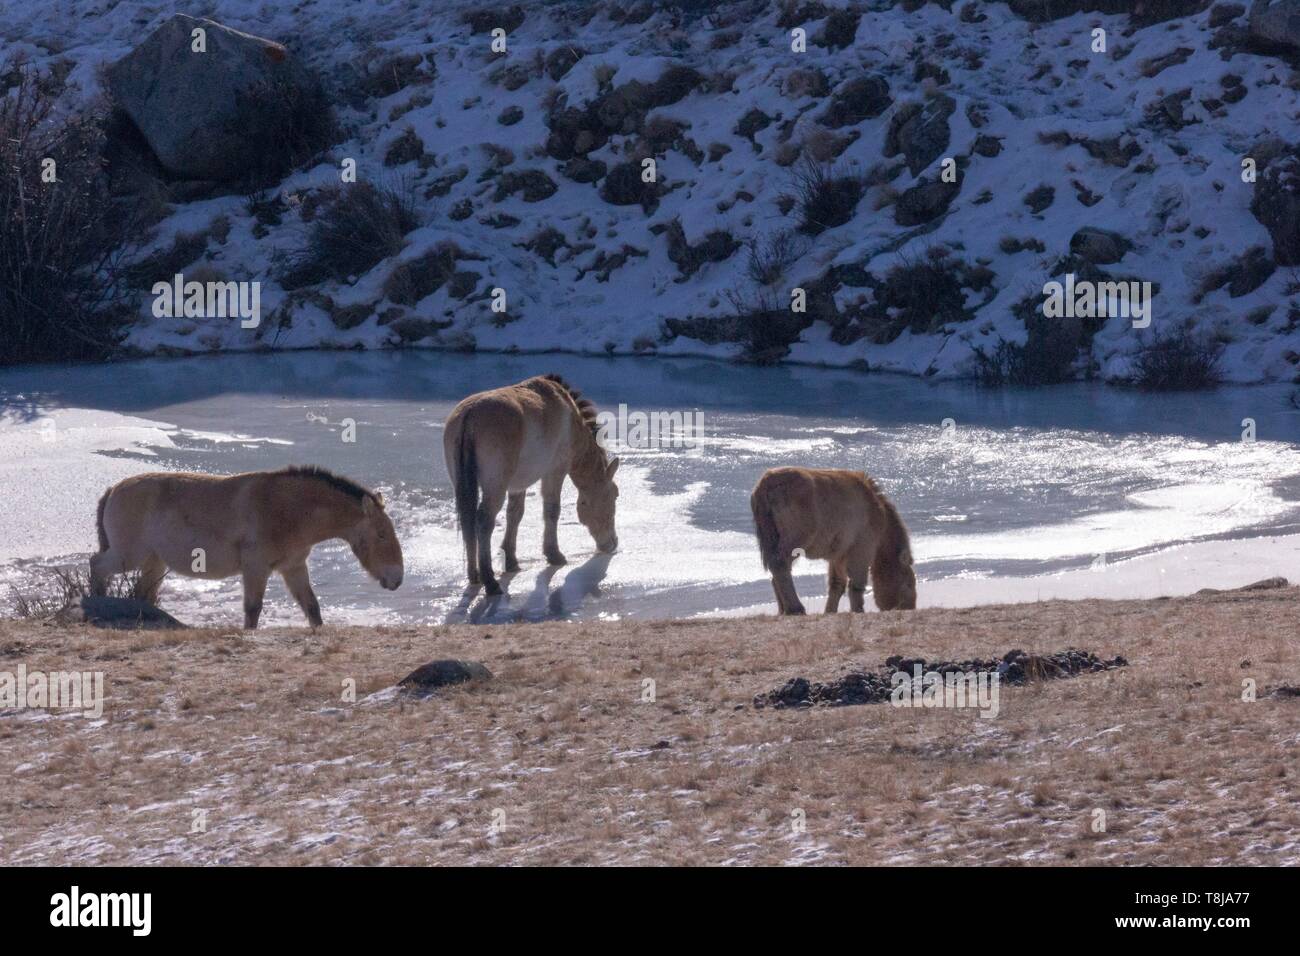 Mongolia, Hustai National Park, Przewalski's horse or Mongolian wild horse or Dzungarian horse ( Equus przewalskii or Equus ferus przewalskii), reintroduced from 1993 into Khustain Nuruu National Park Stock Photo